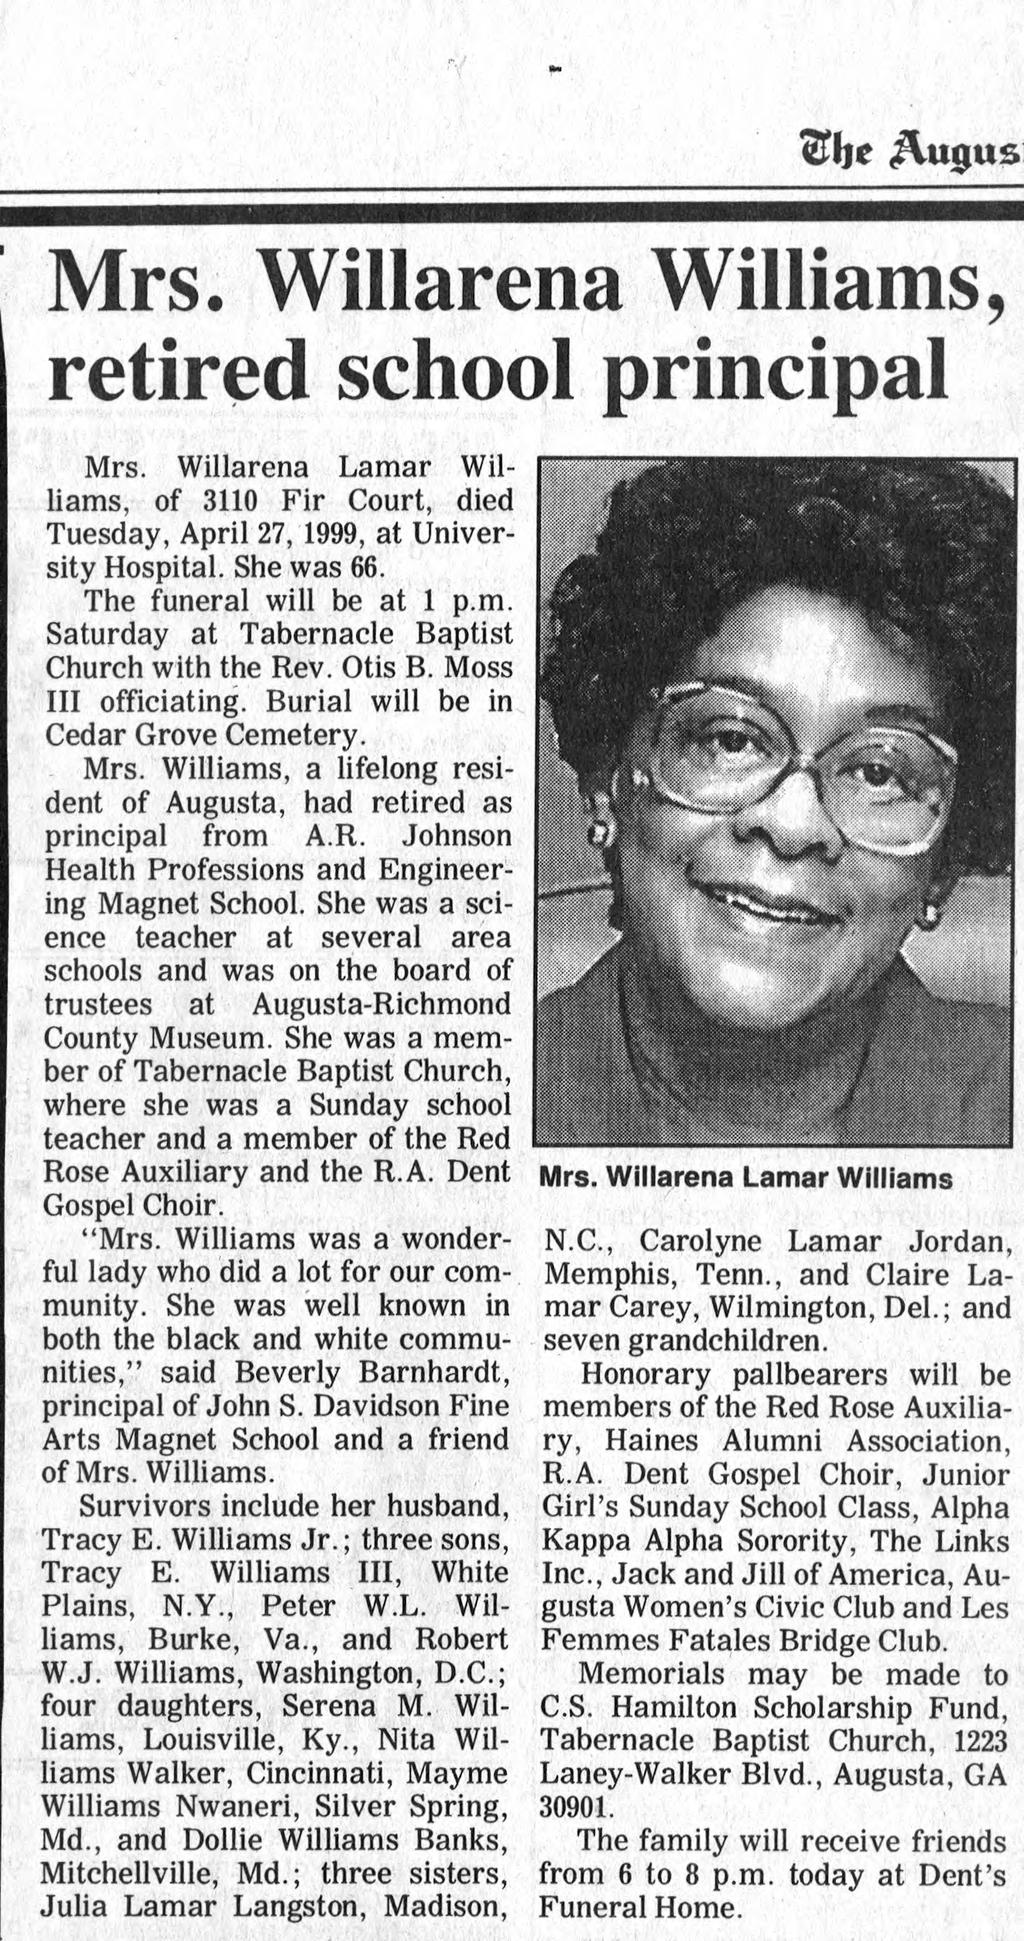 JVu0us Mrs. Willarena Williams, retired school principal Mrs. Willarena Lamar Wil liams, of 3110 Fir Court, died Tuesday, April 27, 1999, at Univer sity Hospital. She was 66.